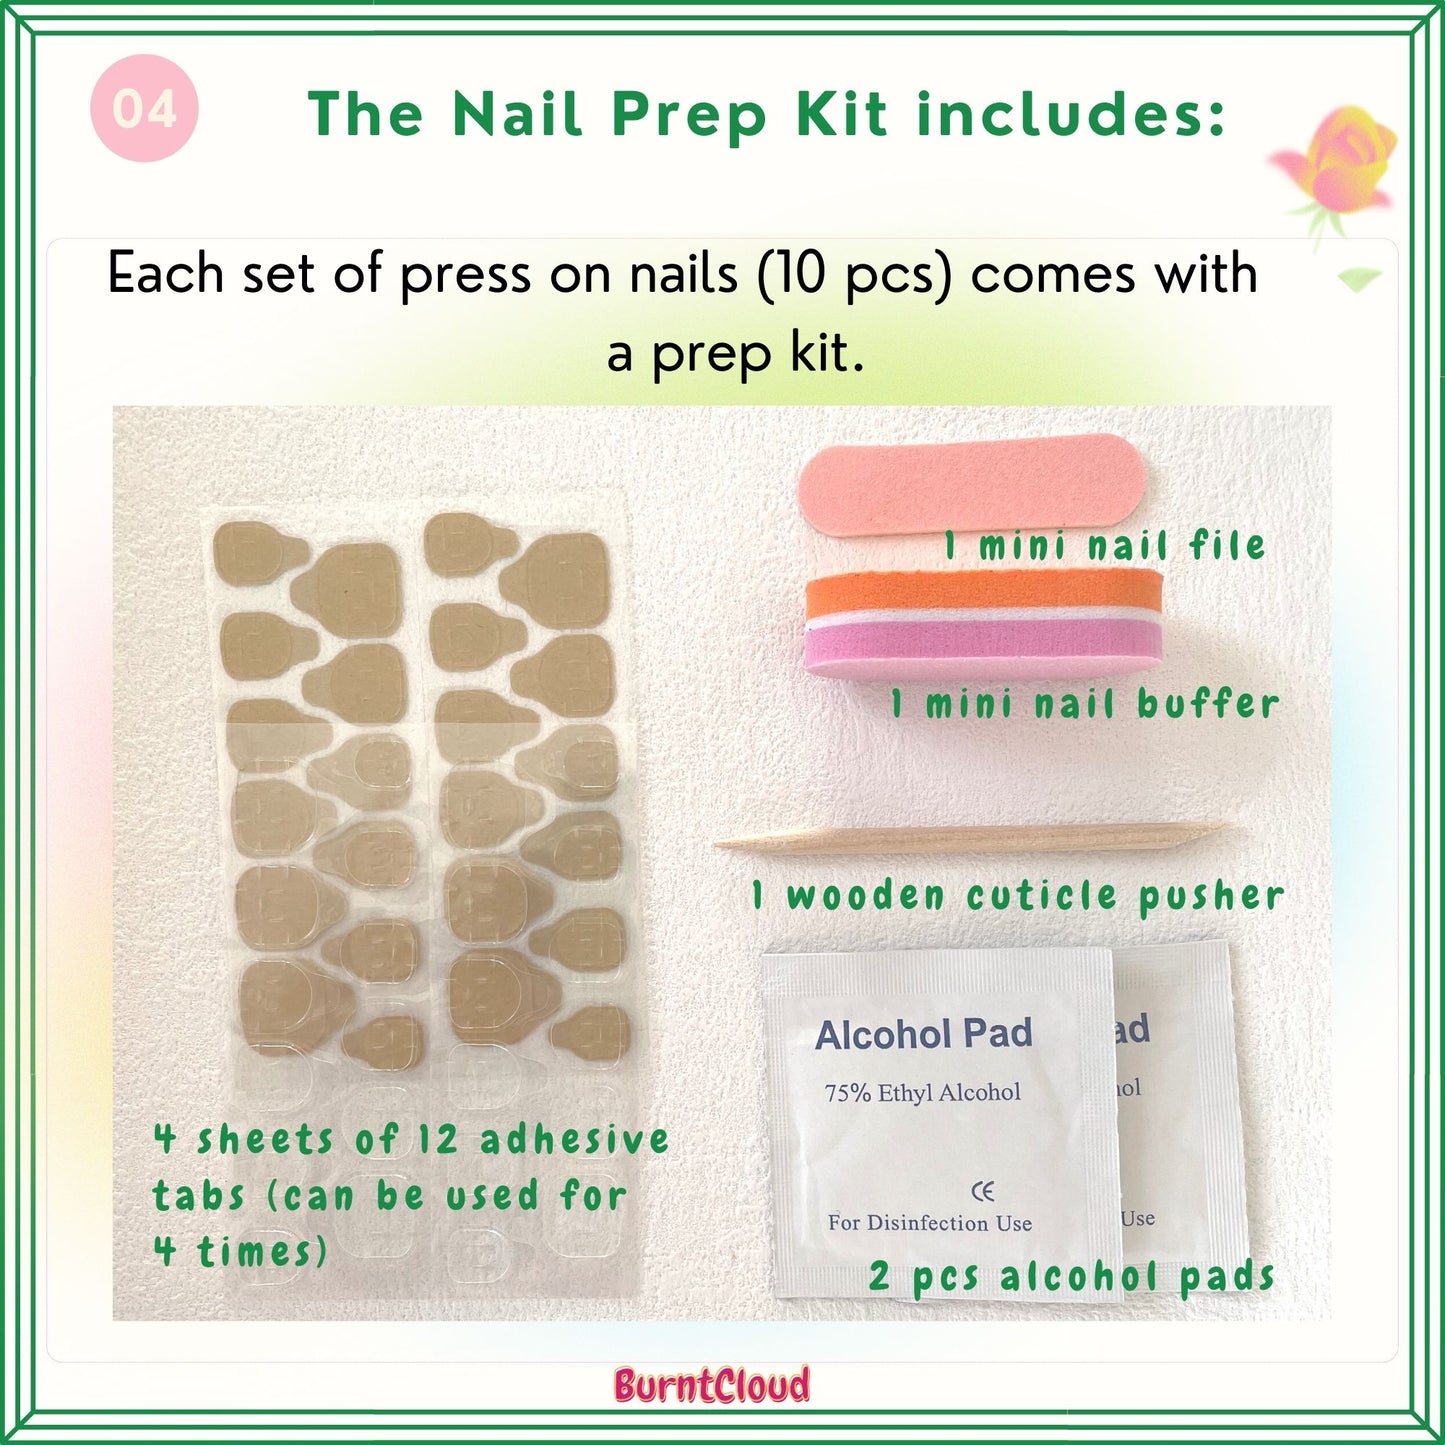 Promotion (Limited Time) "Cool Nude" Ombre Nude Cross Decorated 3D Nails | 62 Custom Handpainted Press on Nails